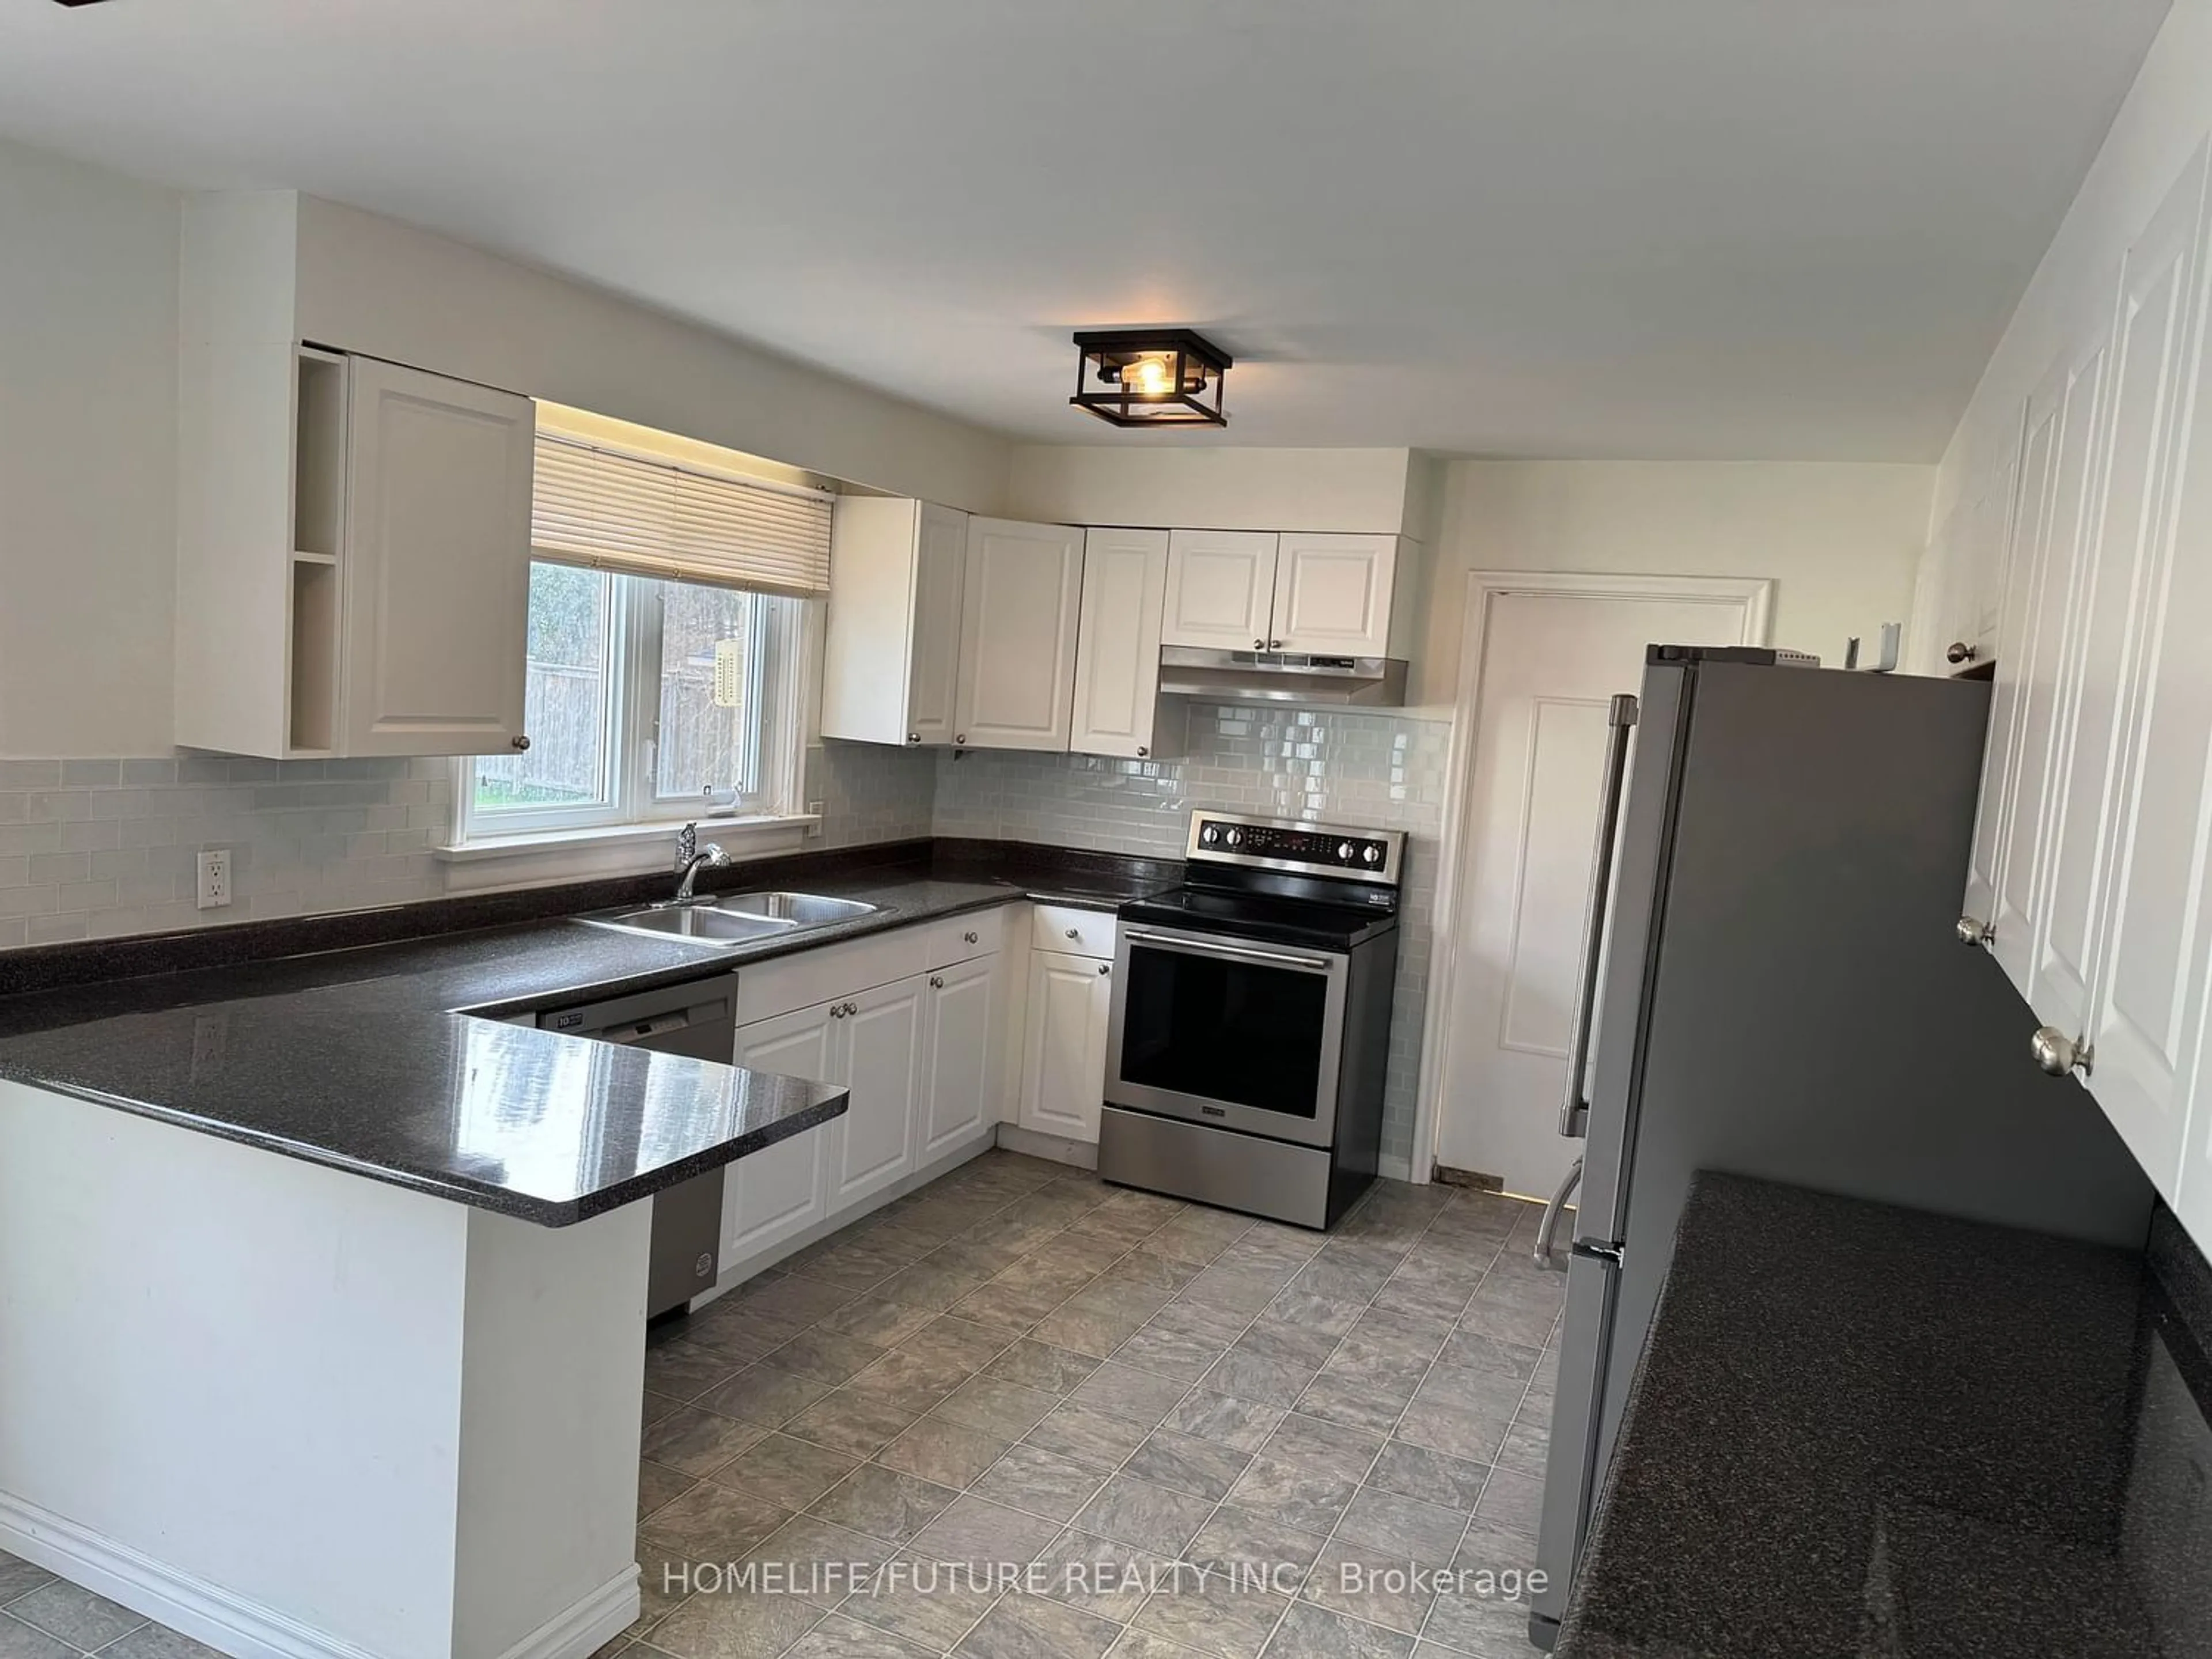 Standard kitchen for 57 Molson St, Port Hope Ontario L1A 2J8